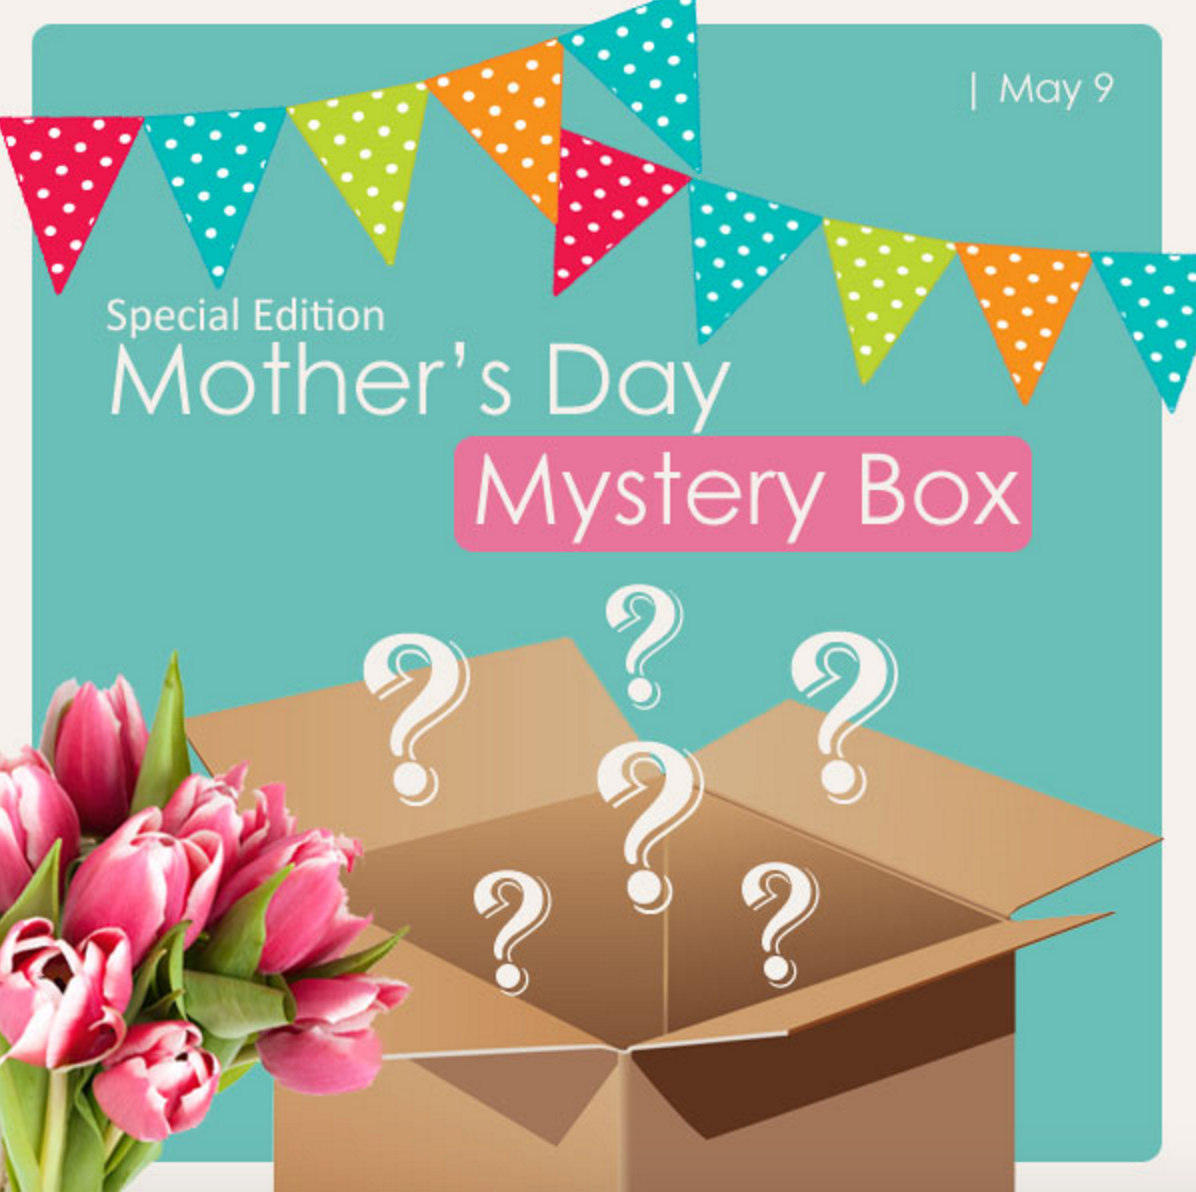 Monthly Mystery Box by Jamminbutter Limited Edition Mother’s Day Box